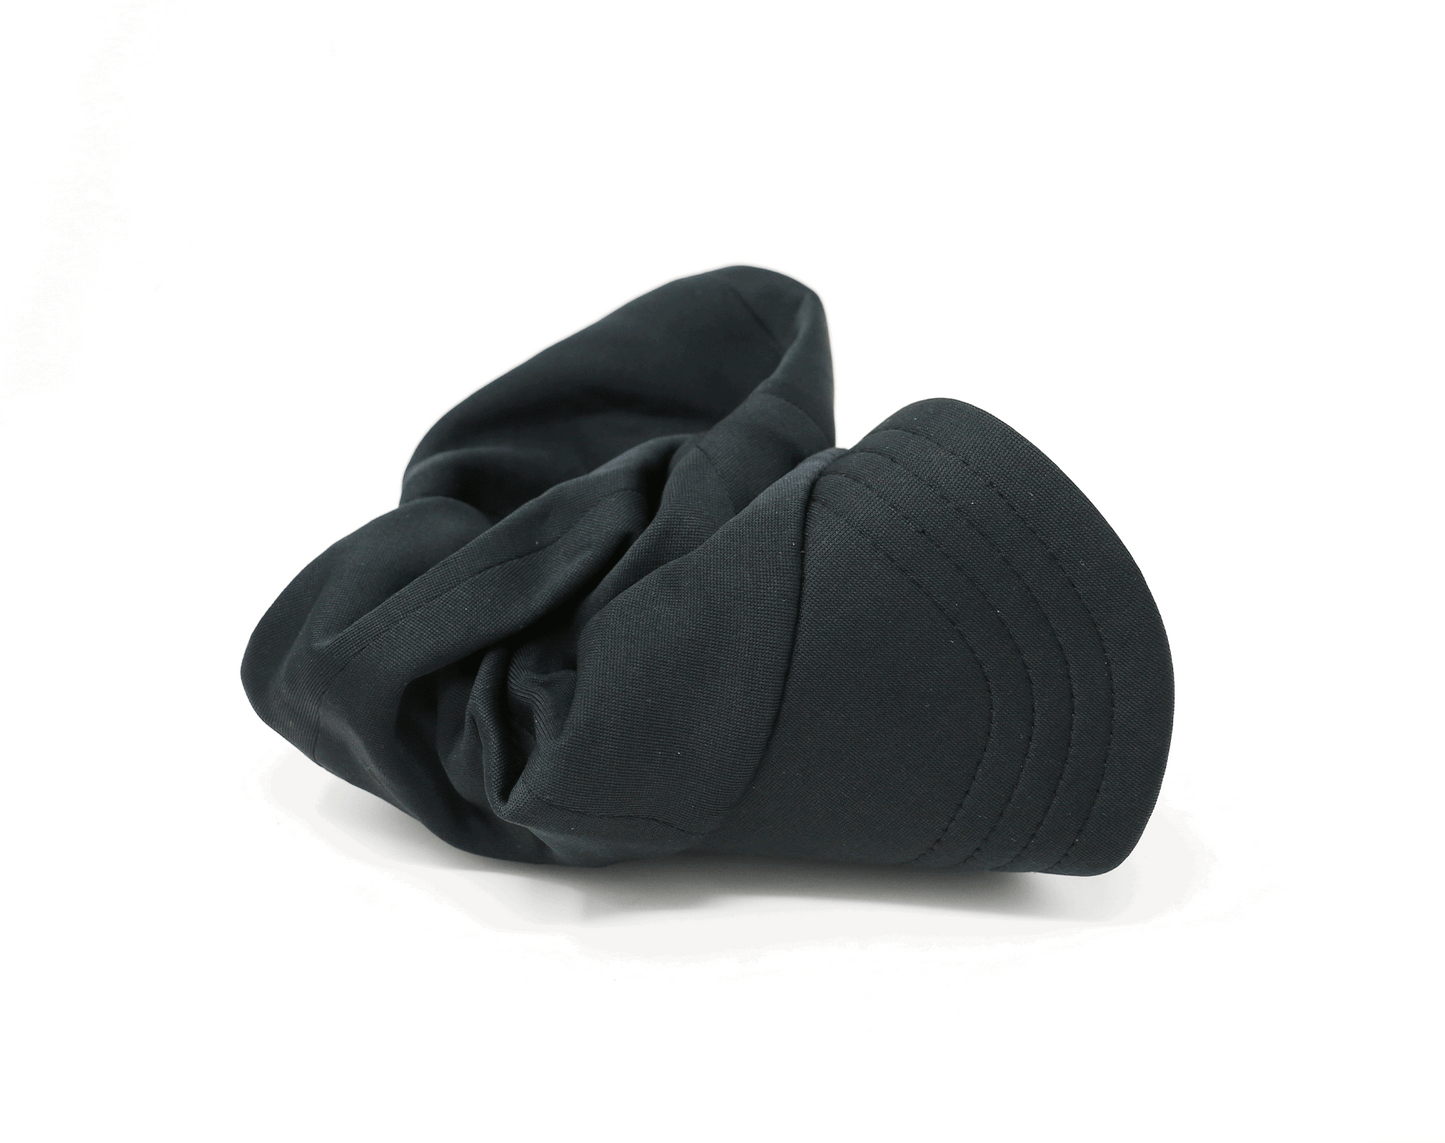 The Everything Hat Jet Black